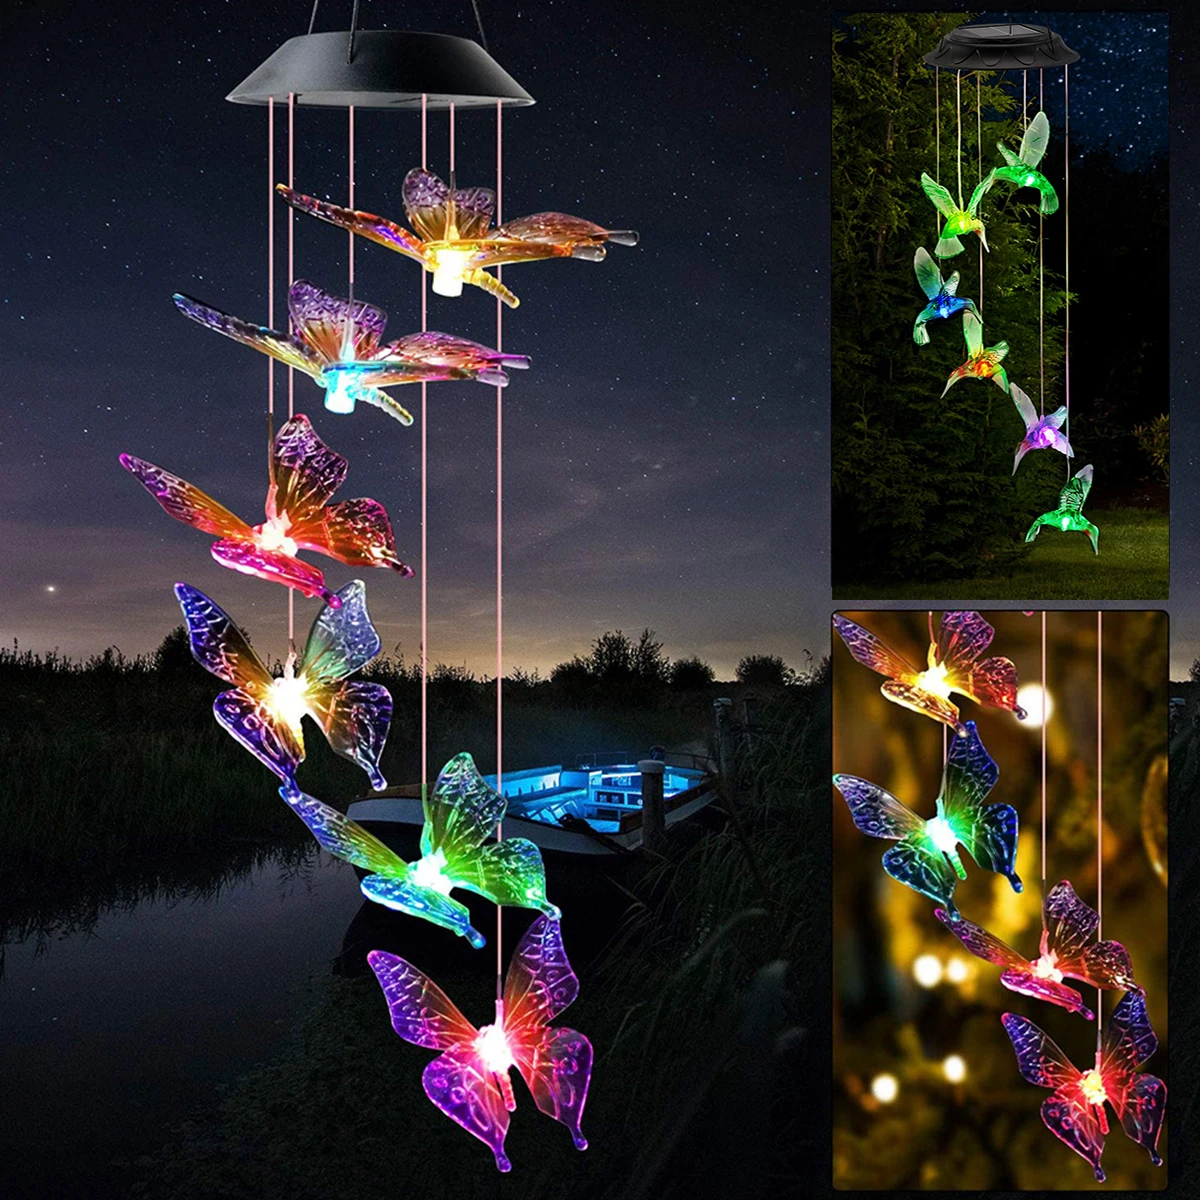 LED Solar Wind Chime Light Garden Butterfly Wind Chime Lamp Colorful Waterproof Hanging Solar Light for Garden Yard Home Decor 1